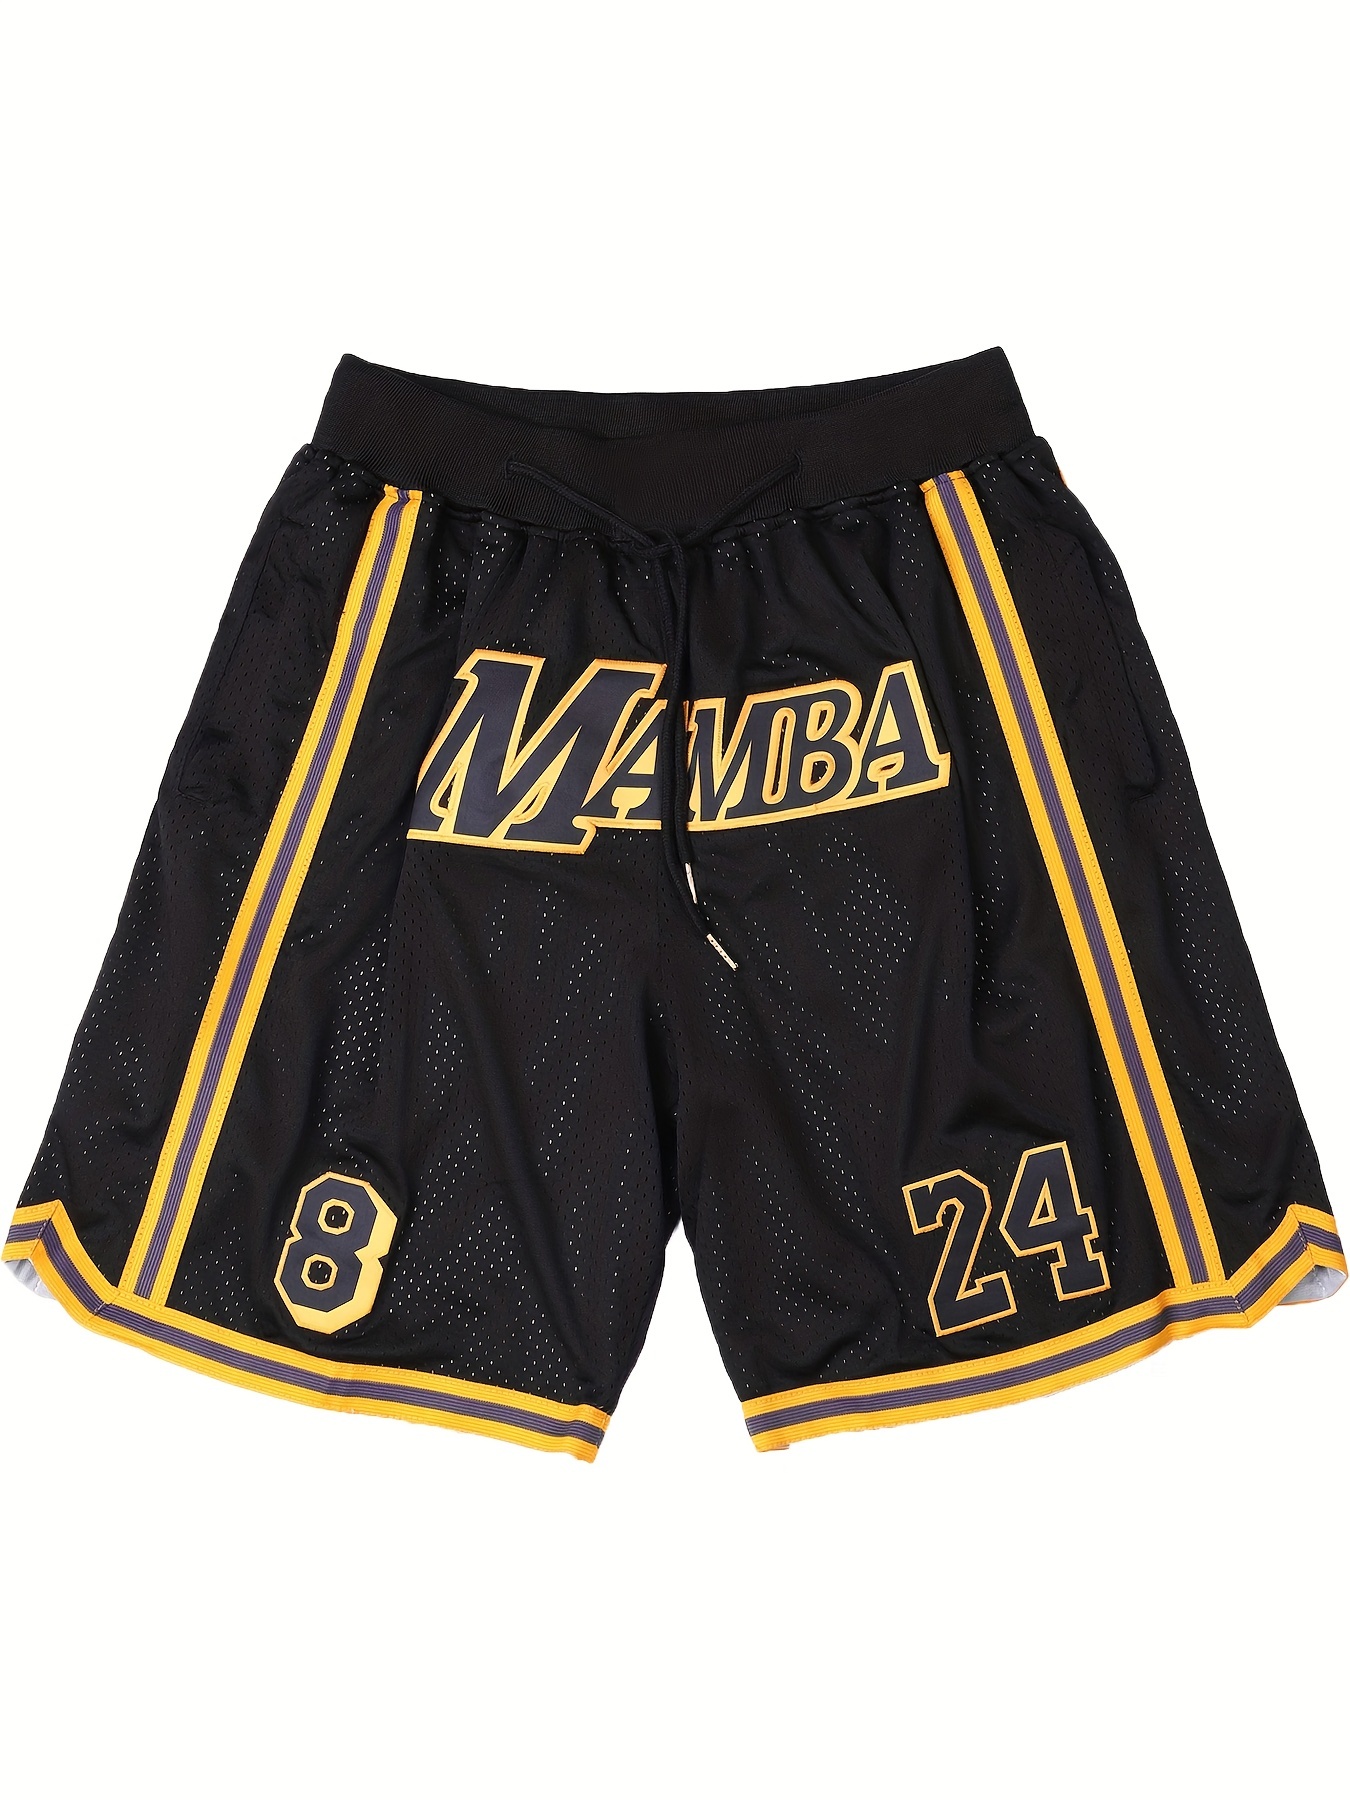 NBA Shorts Men's Black Lakers All Stitched